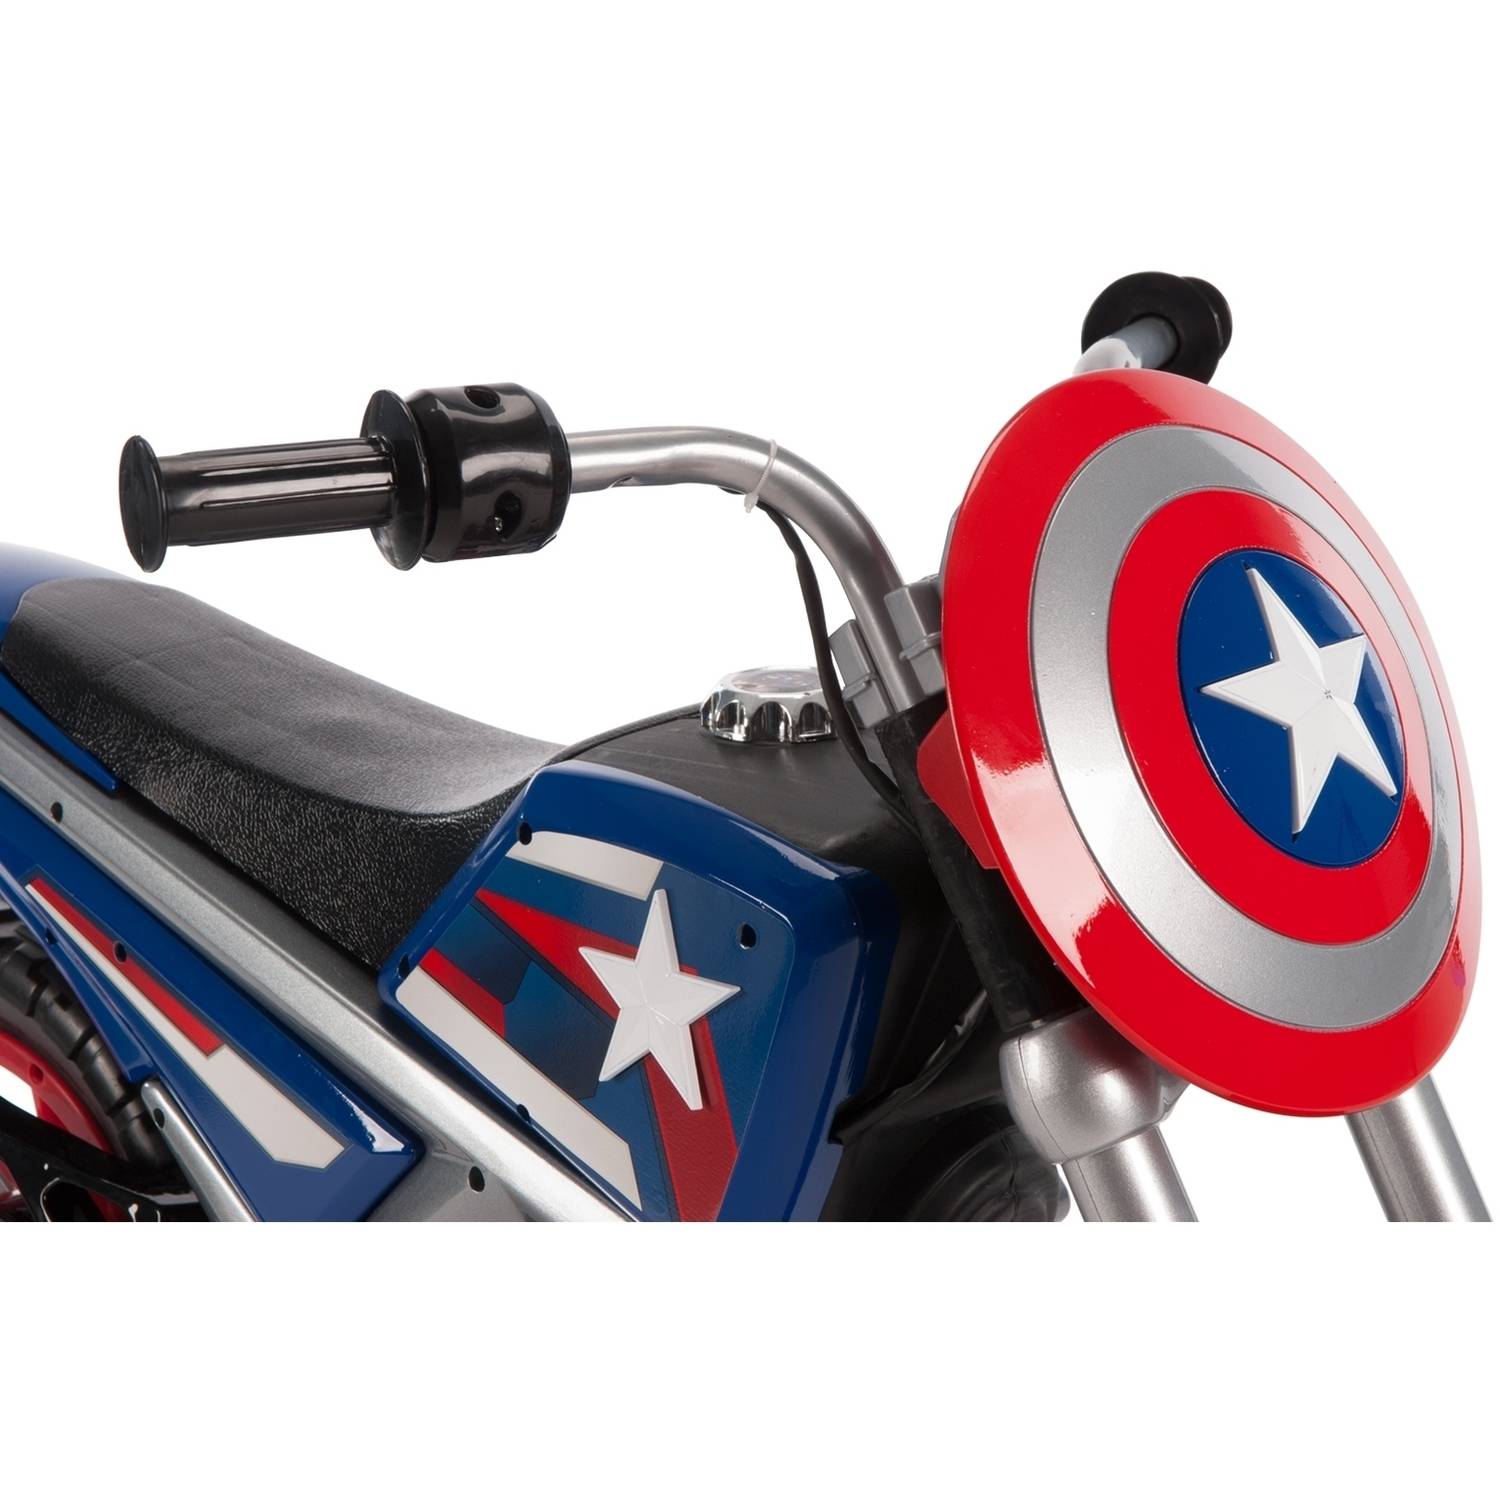 Captain America 6V Battery-Powered Ride-On Toy by Huffy - image 5 of 6